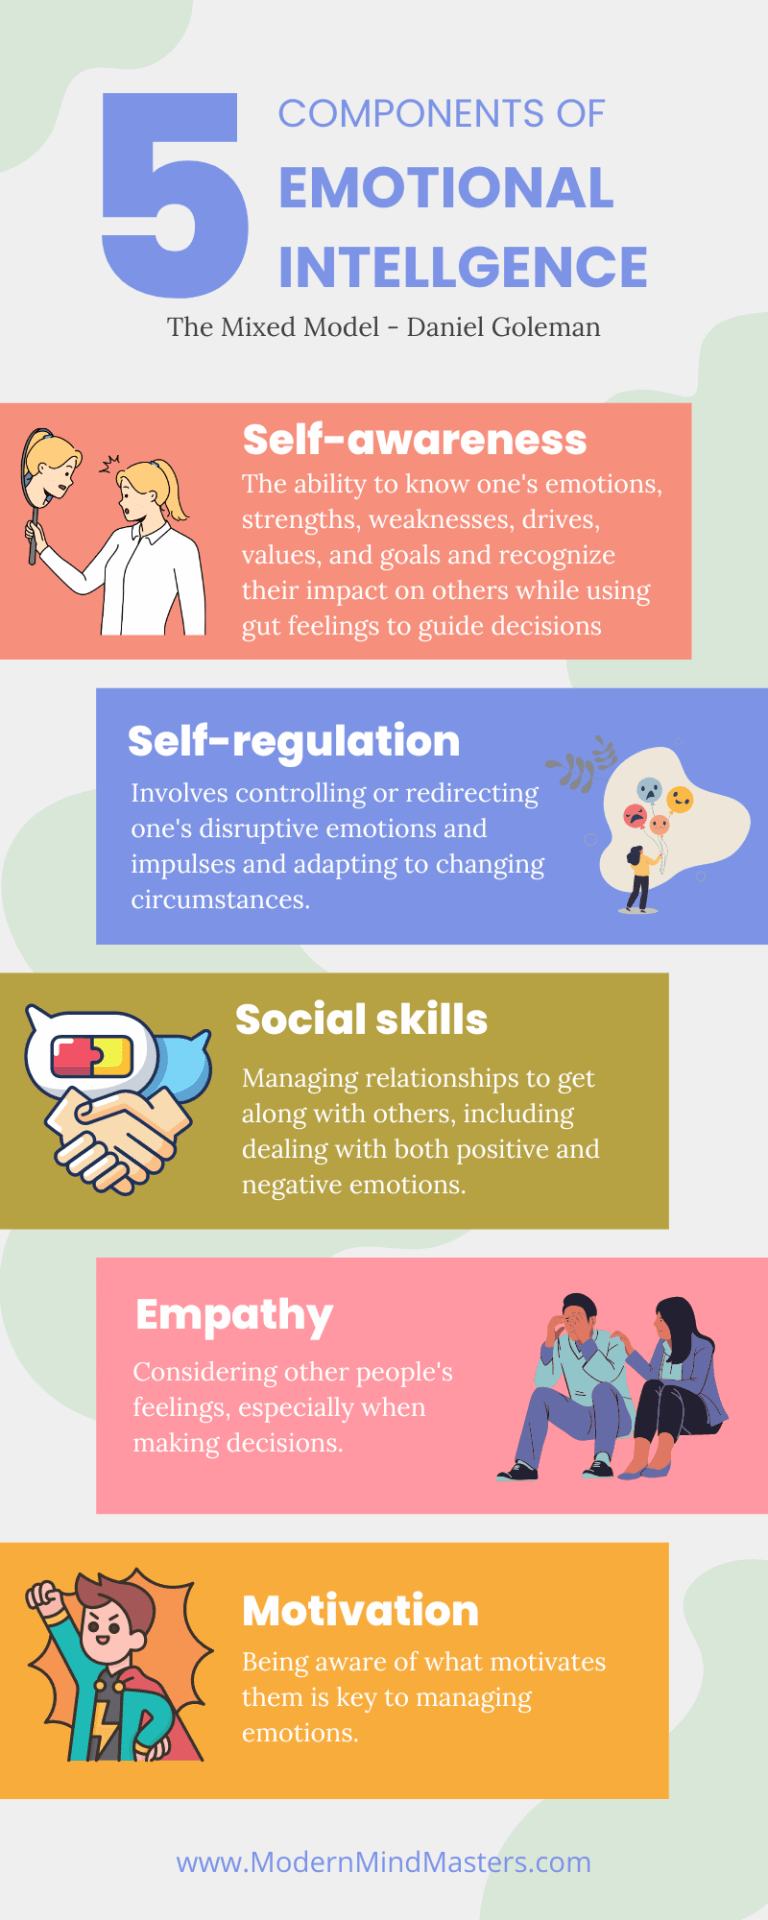 The five components of emotional intelligence according to Daniel Goleman's mixed model.